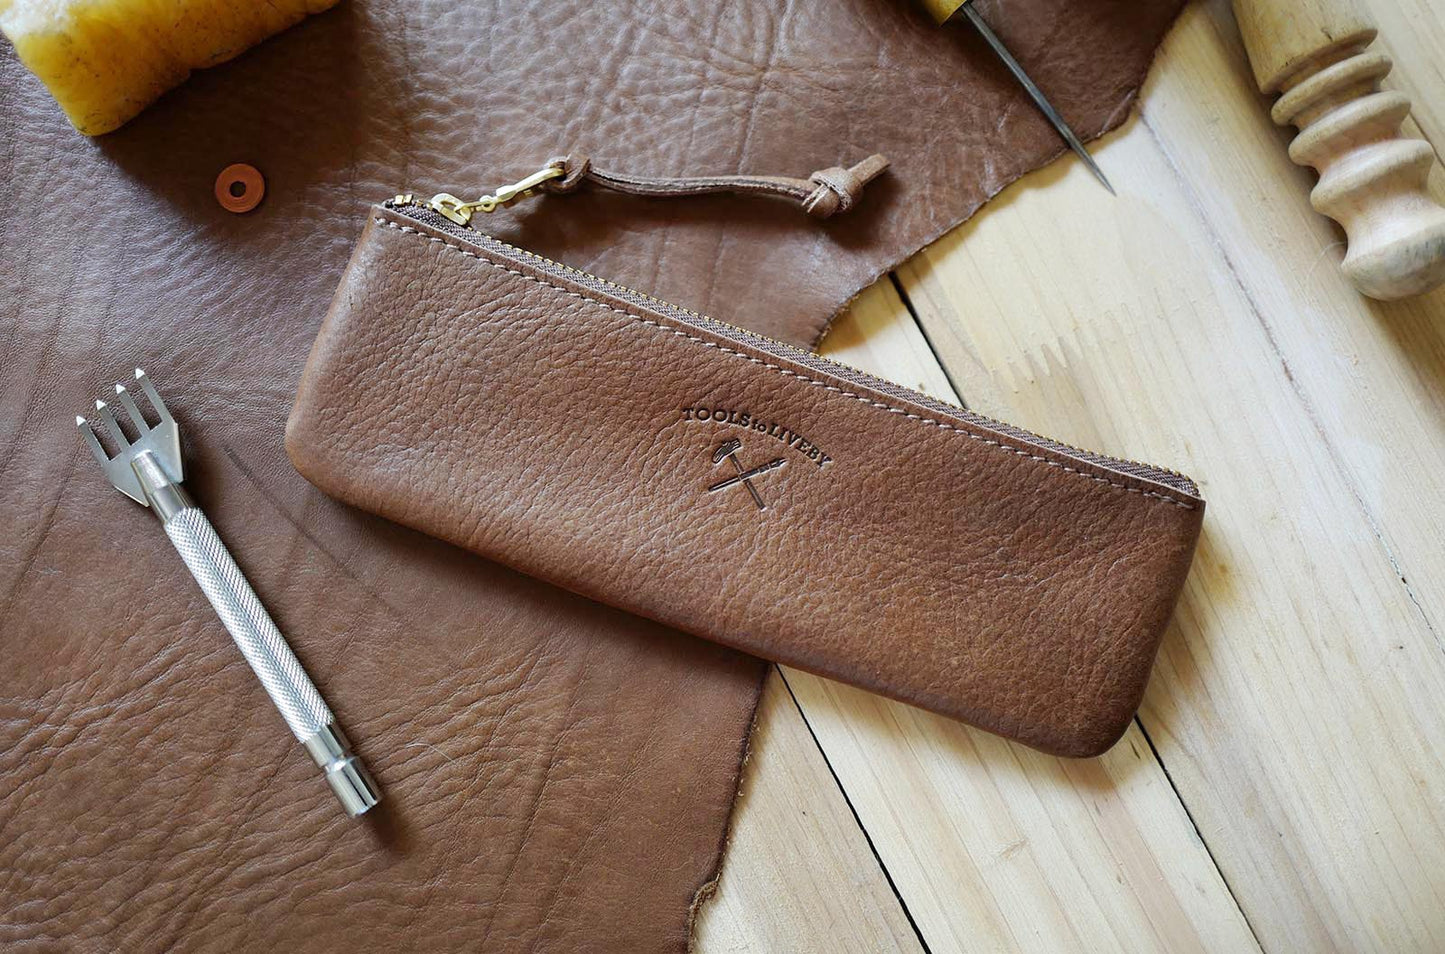 Small Leather Case - Brown